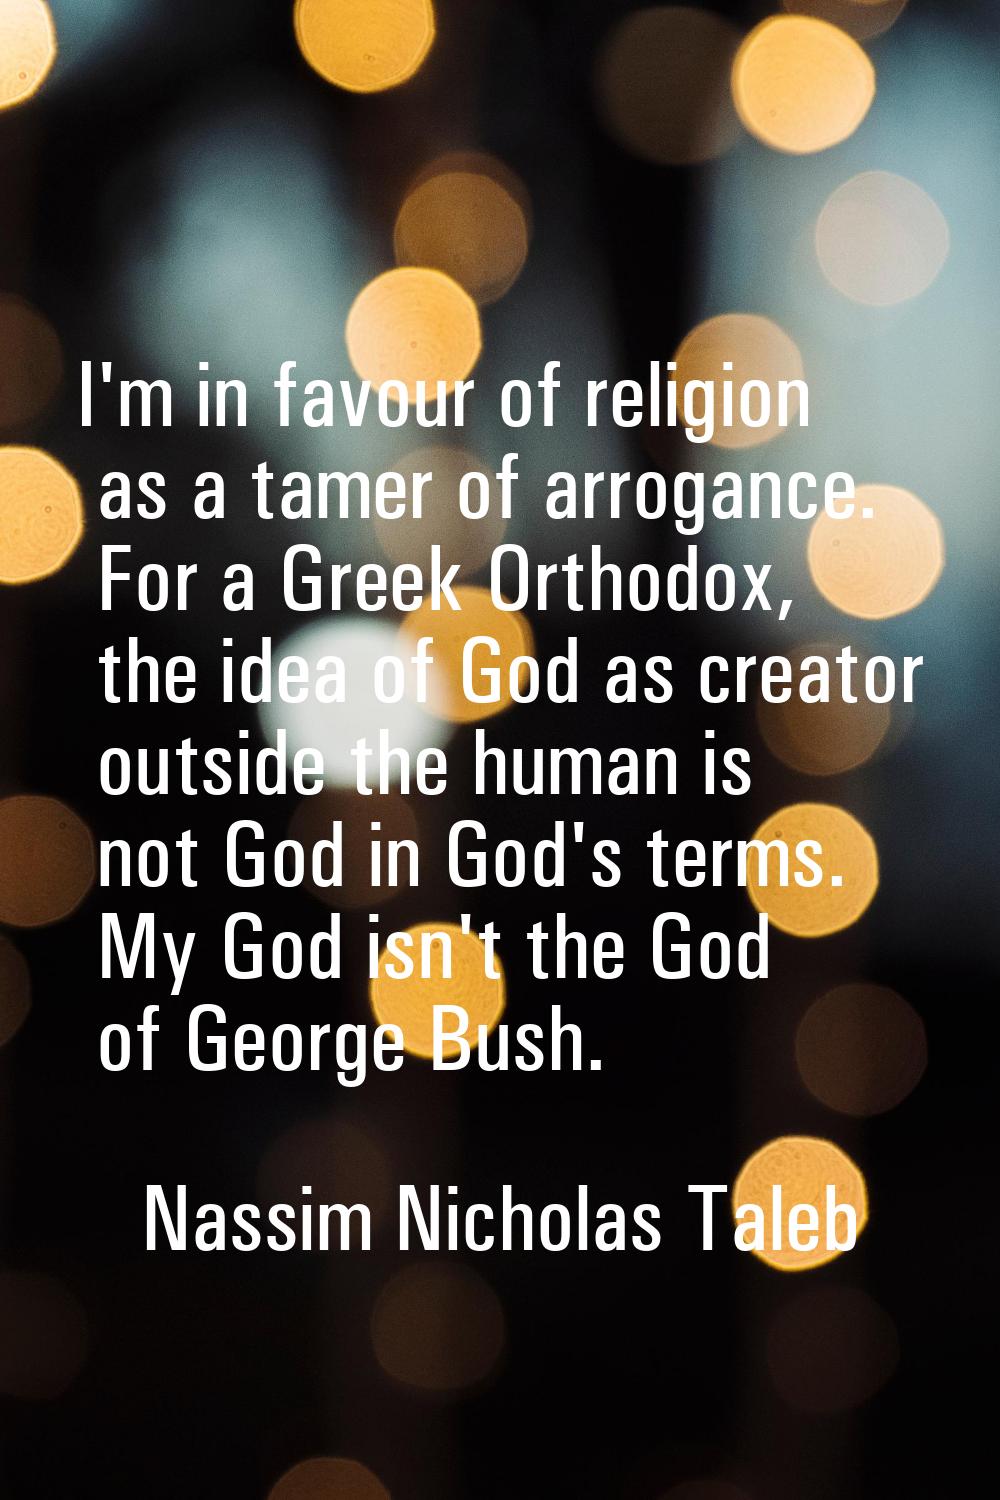 I'm in favour of religion as a tamer of arrogance. For a Greek Orthodox, the idea of God as creator